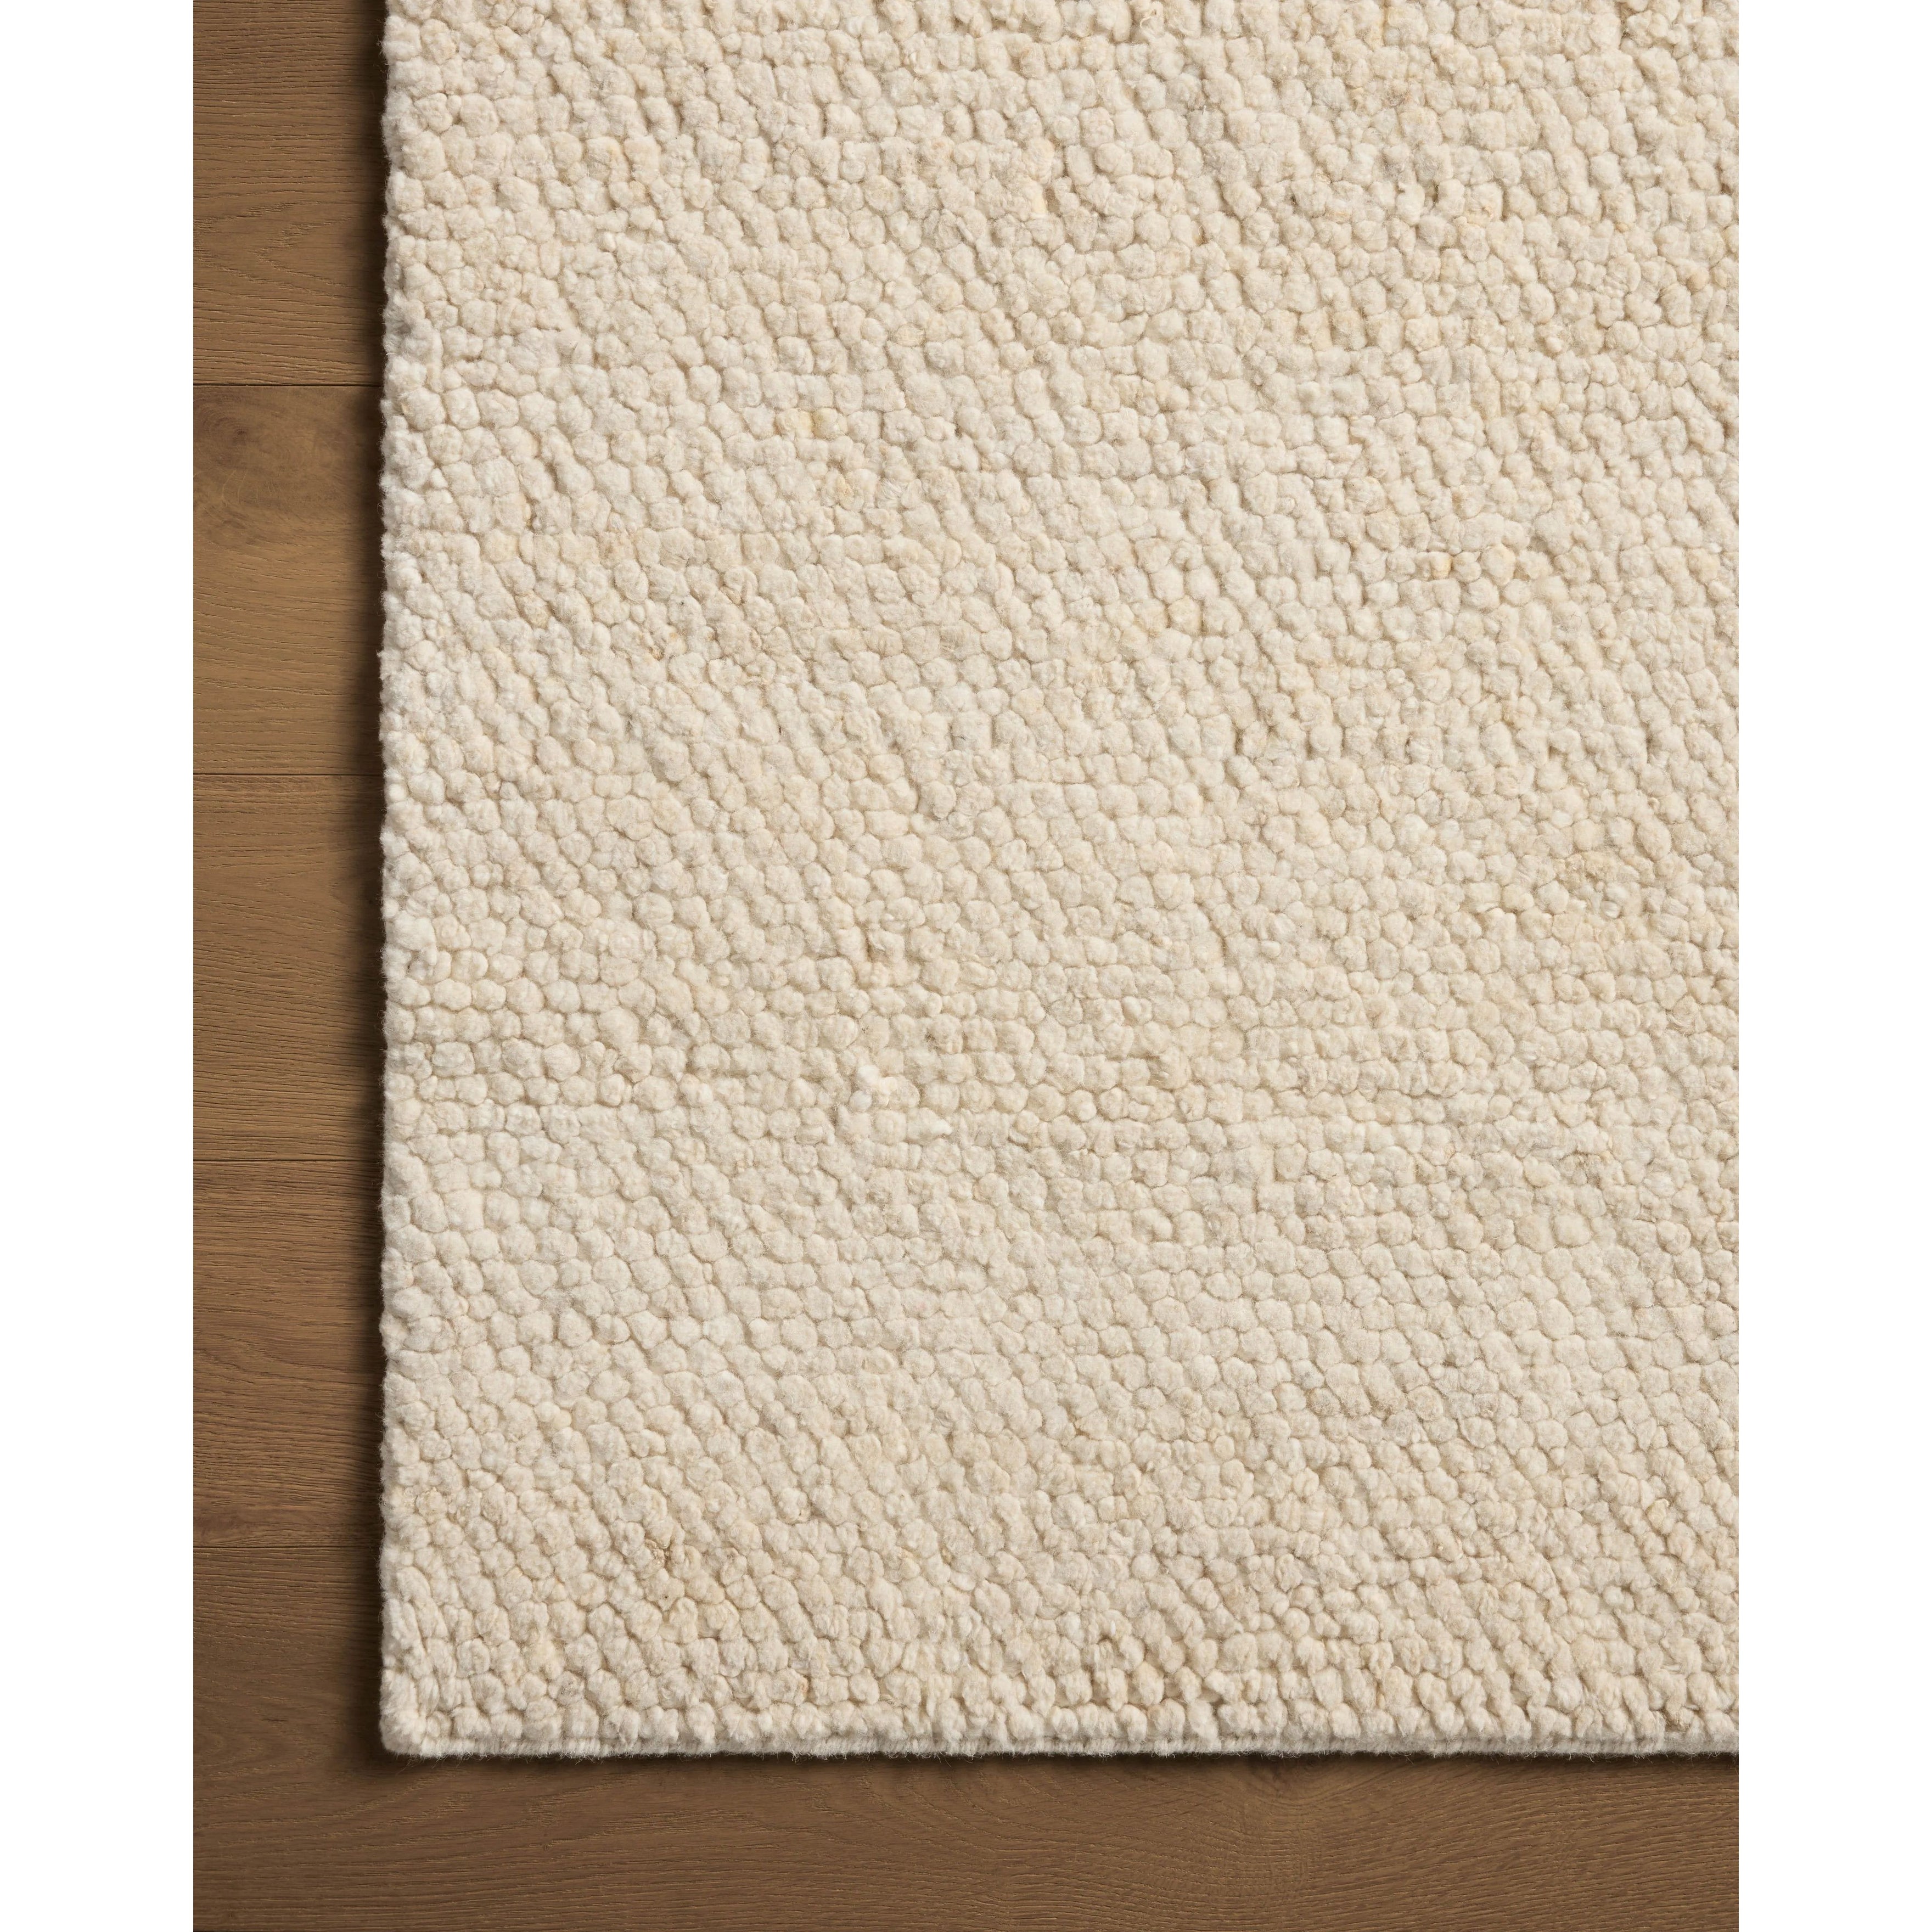 With versatile earth tones and a chunky, hand-knotted texture resembling tiny pebbles, the Frida Natural Rug by Brigette Romanek x Loloi can ground any room with a sense of elevated ease. Each area rug features a subtle nuance in color variation due to the handmade nature of its construction and has a pleasantly nubby softness underfoot. Amethyst Home provides interior design, new home construction design consulting, vintage area rugs, and lighting in the Monterey metro area.